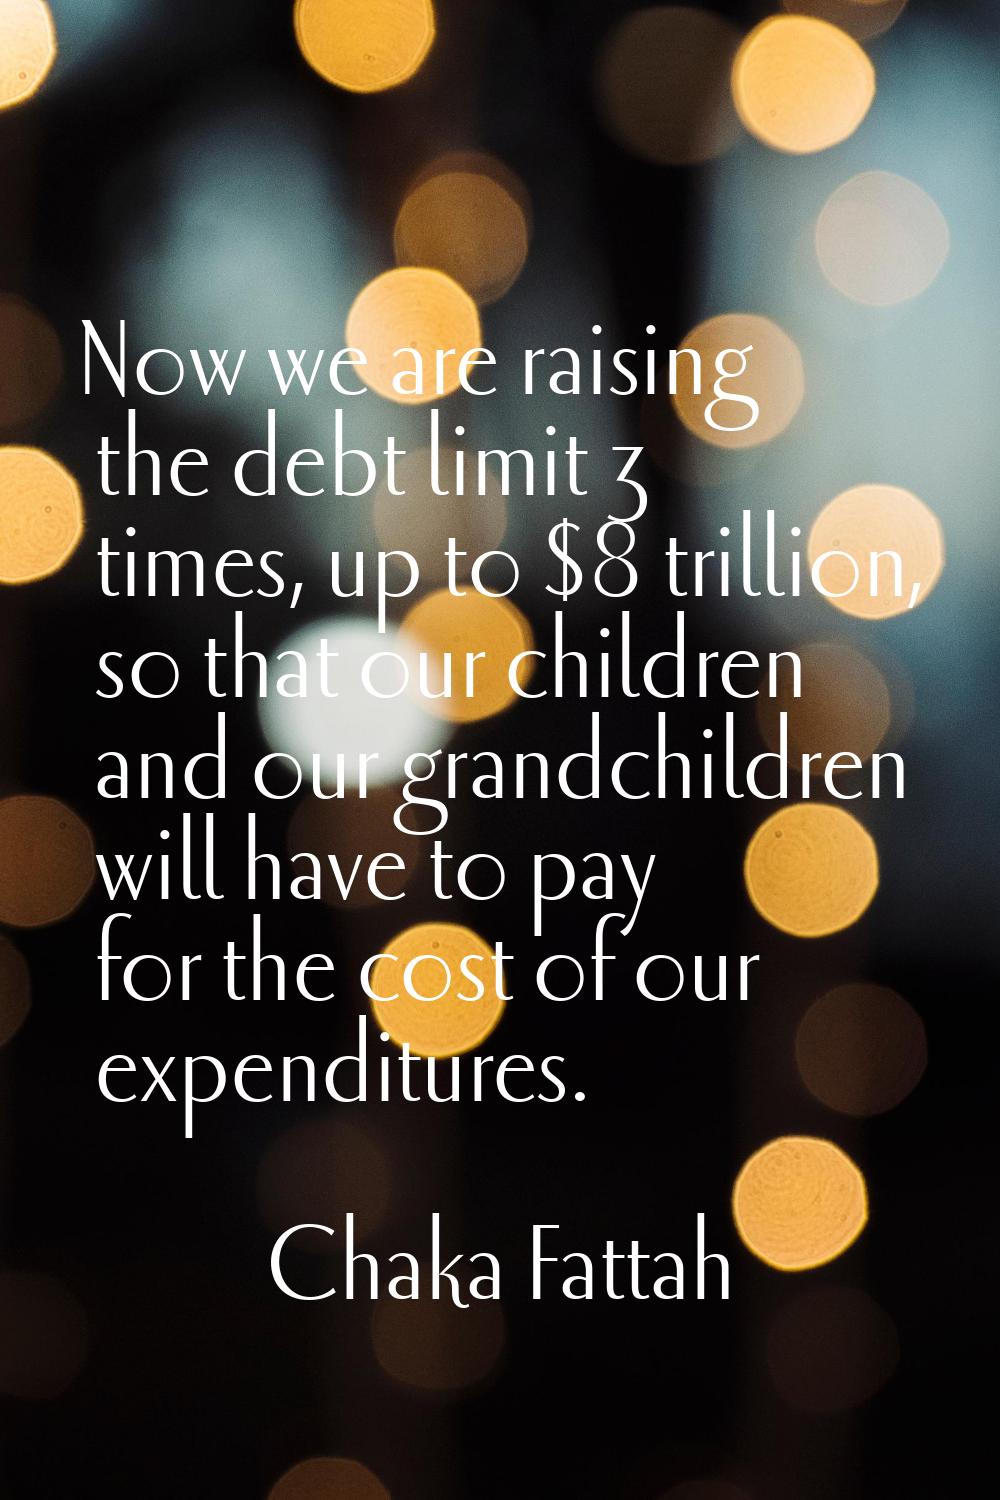 Now we are raising the debt limit 3 times, up to $8 trillion, so that our children and our grandchi